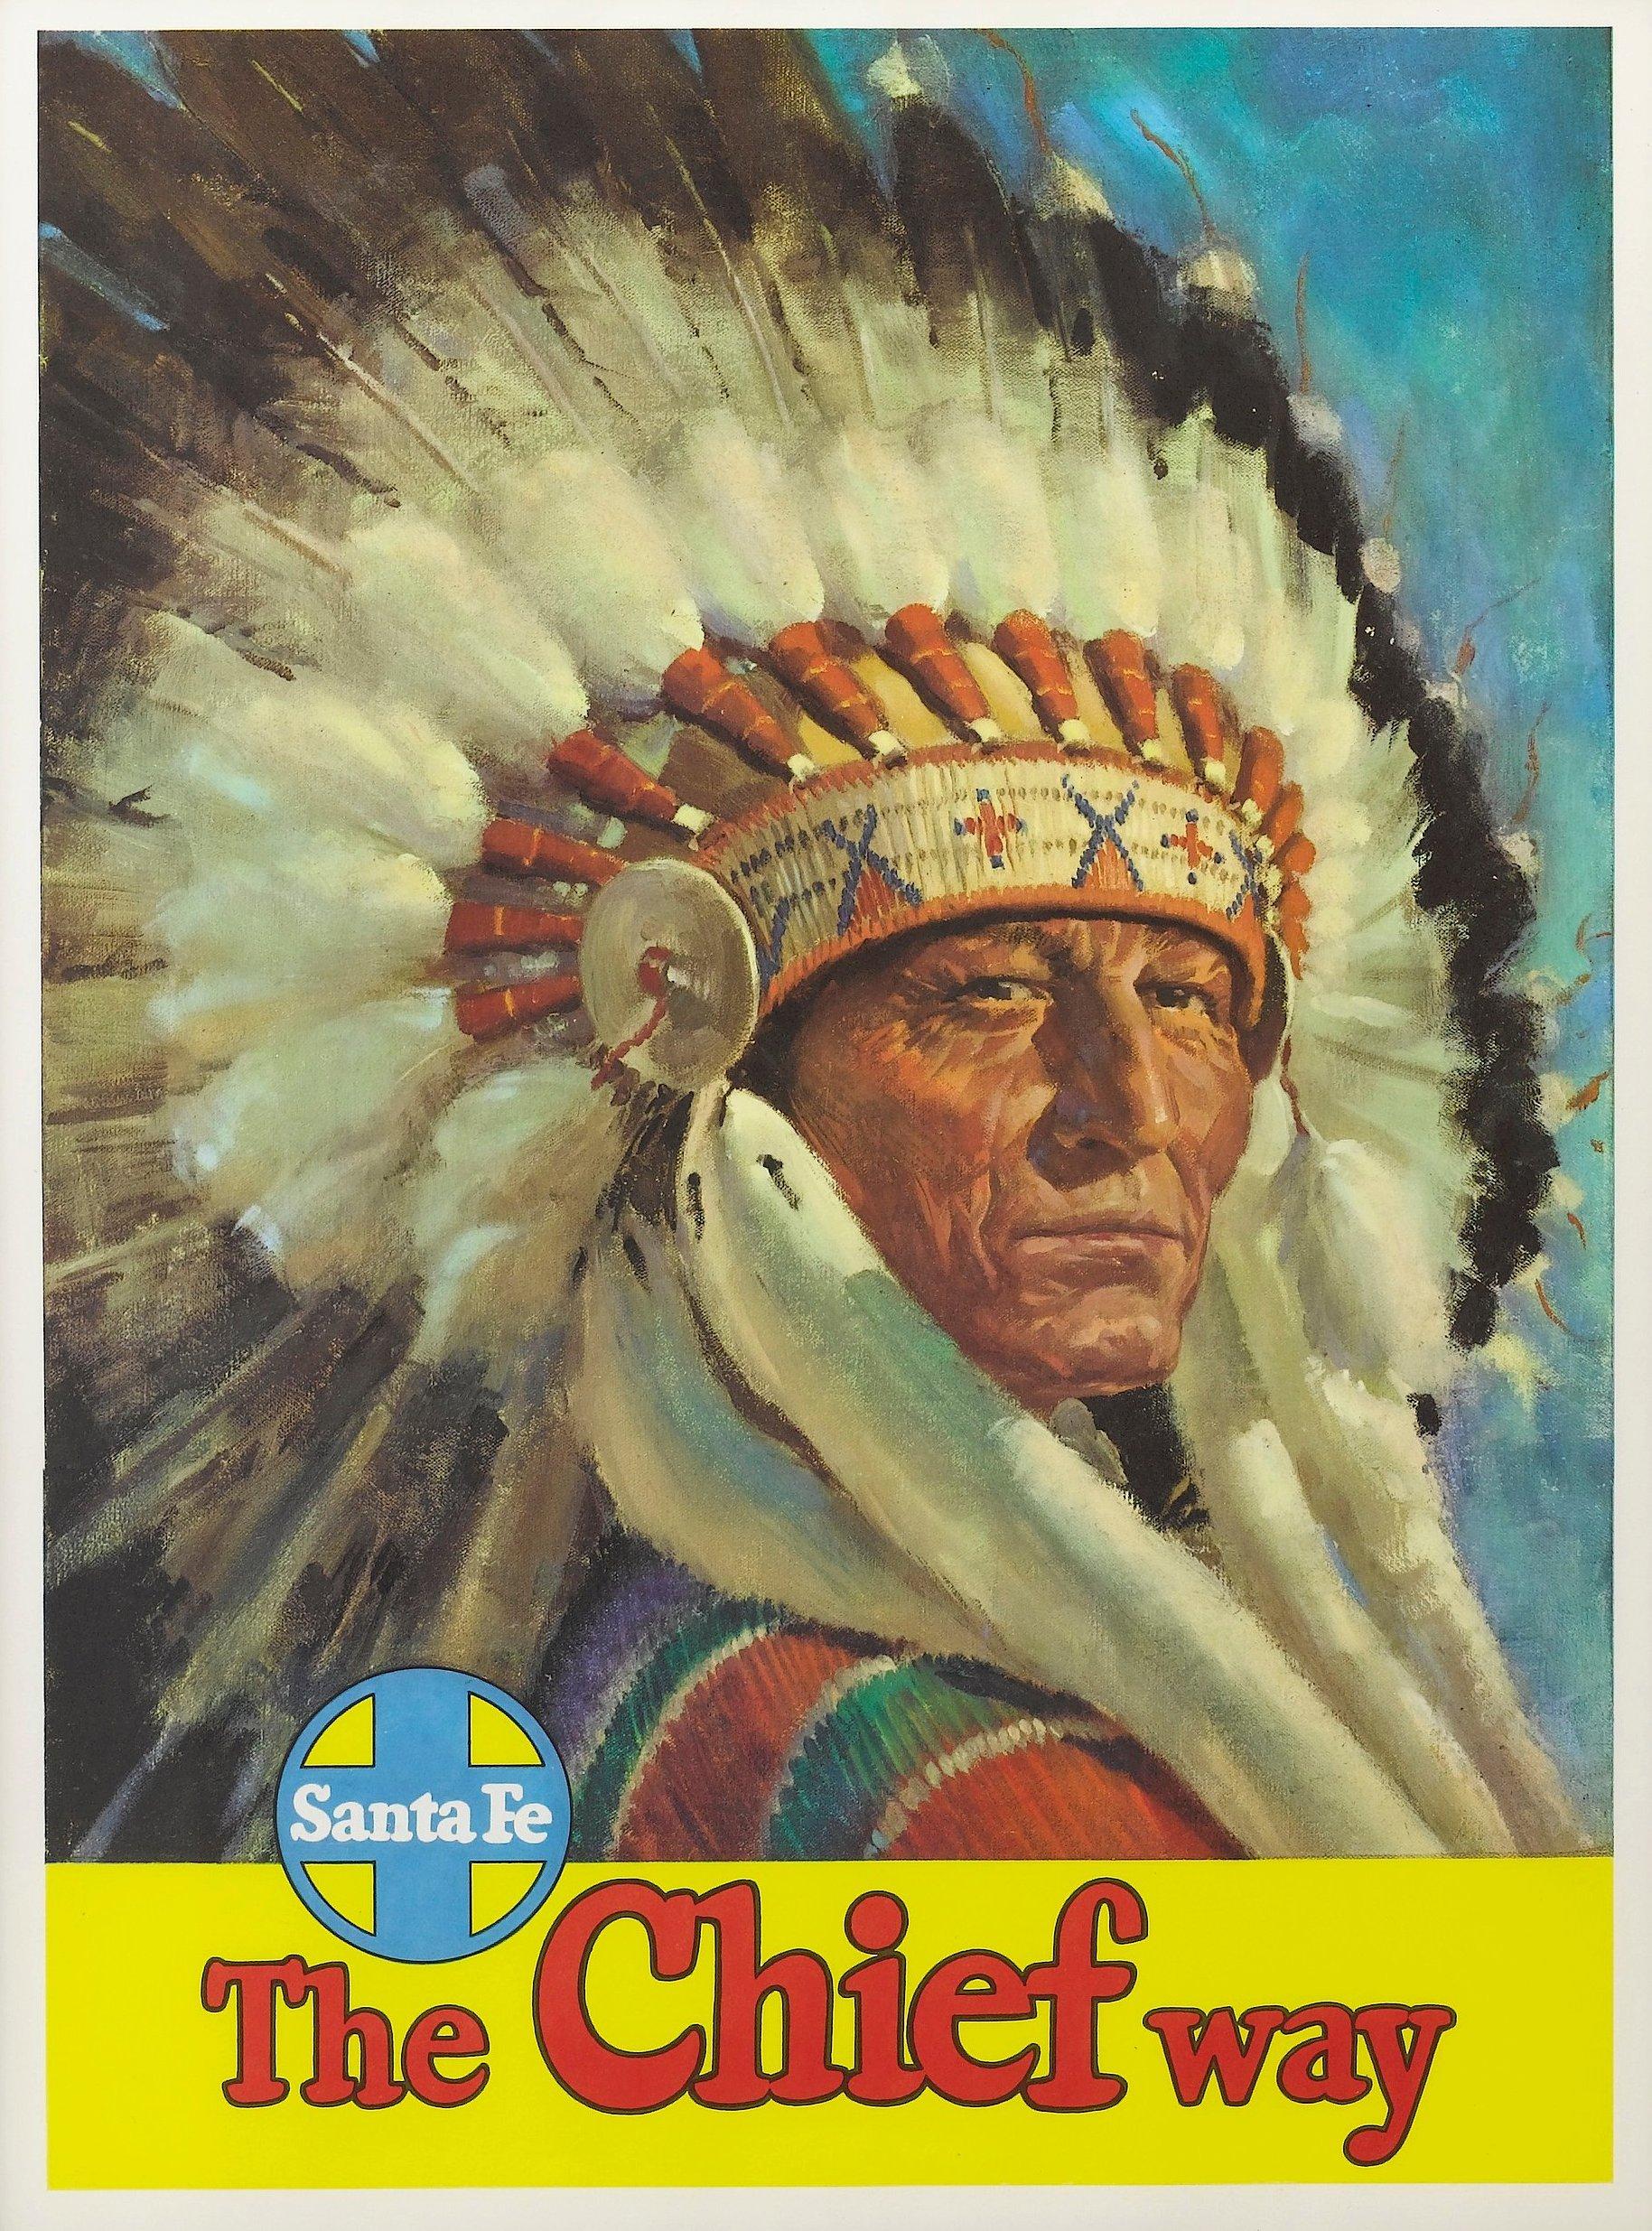 This is a vintage travel poster for the Santa Fe Southern Railway, circa 1947. The poster is illustrated with a paradigmatic image of a Native American chief, so drawn to align the Santa Fe railroad with a romanticized version of America's old west.